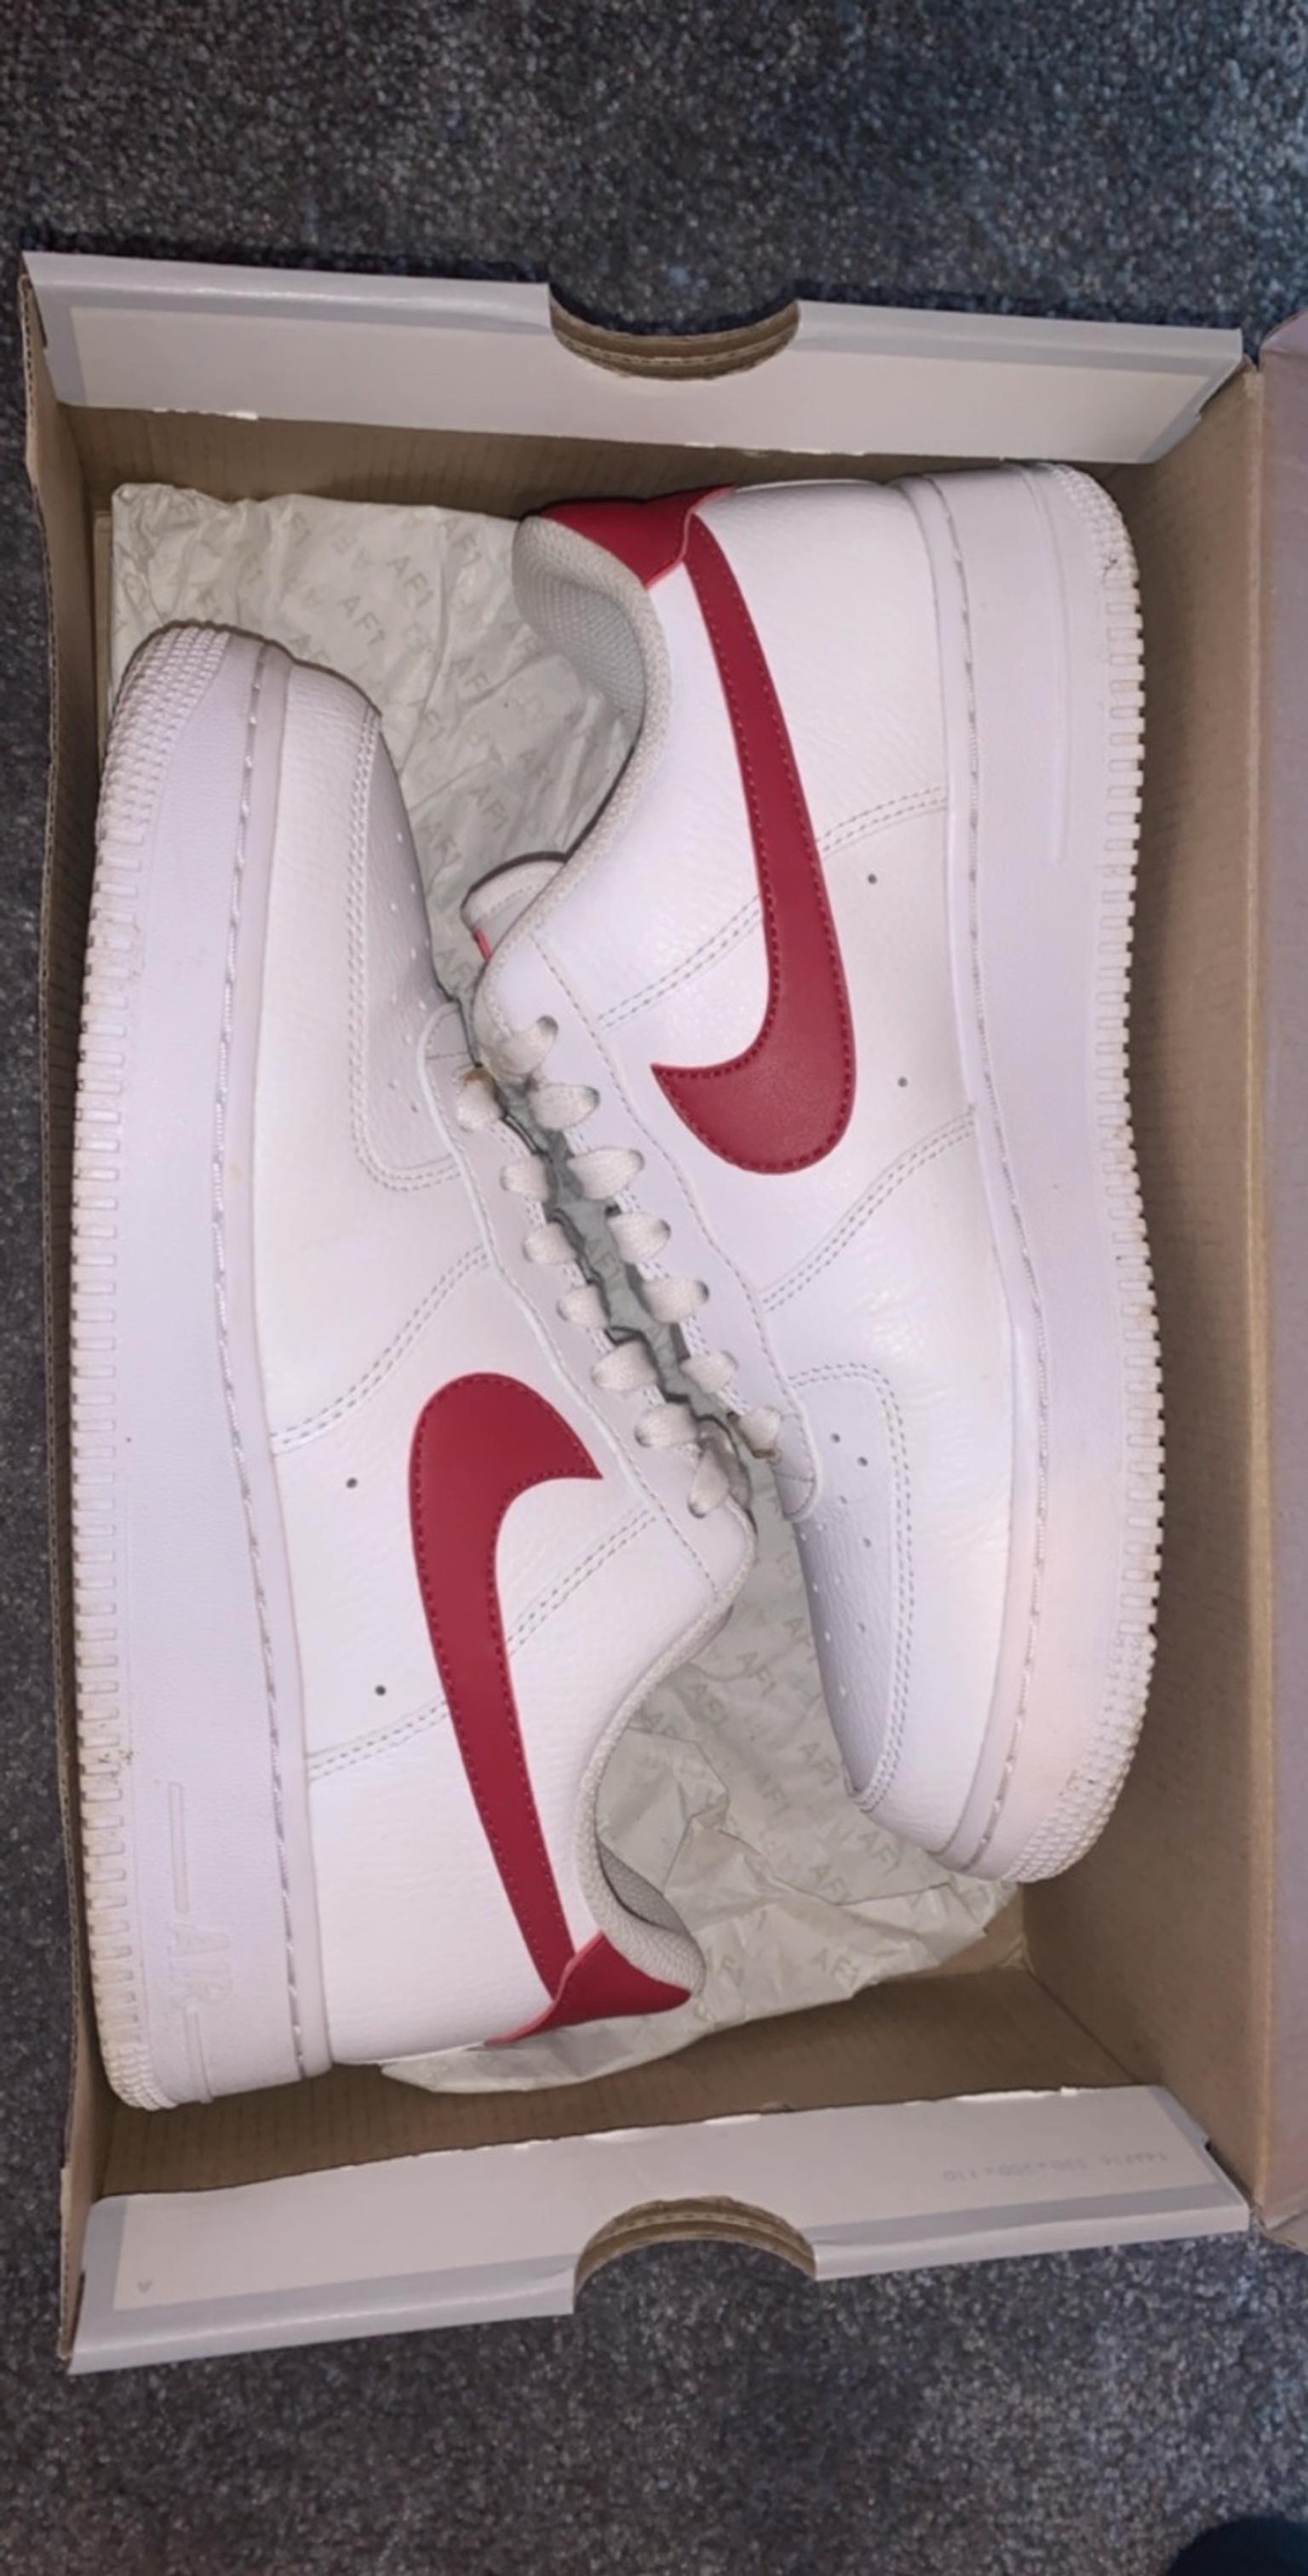 air force 1 with red tick